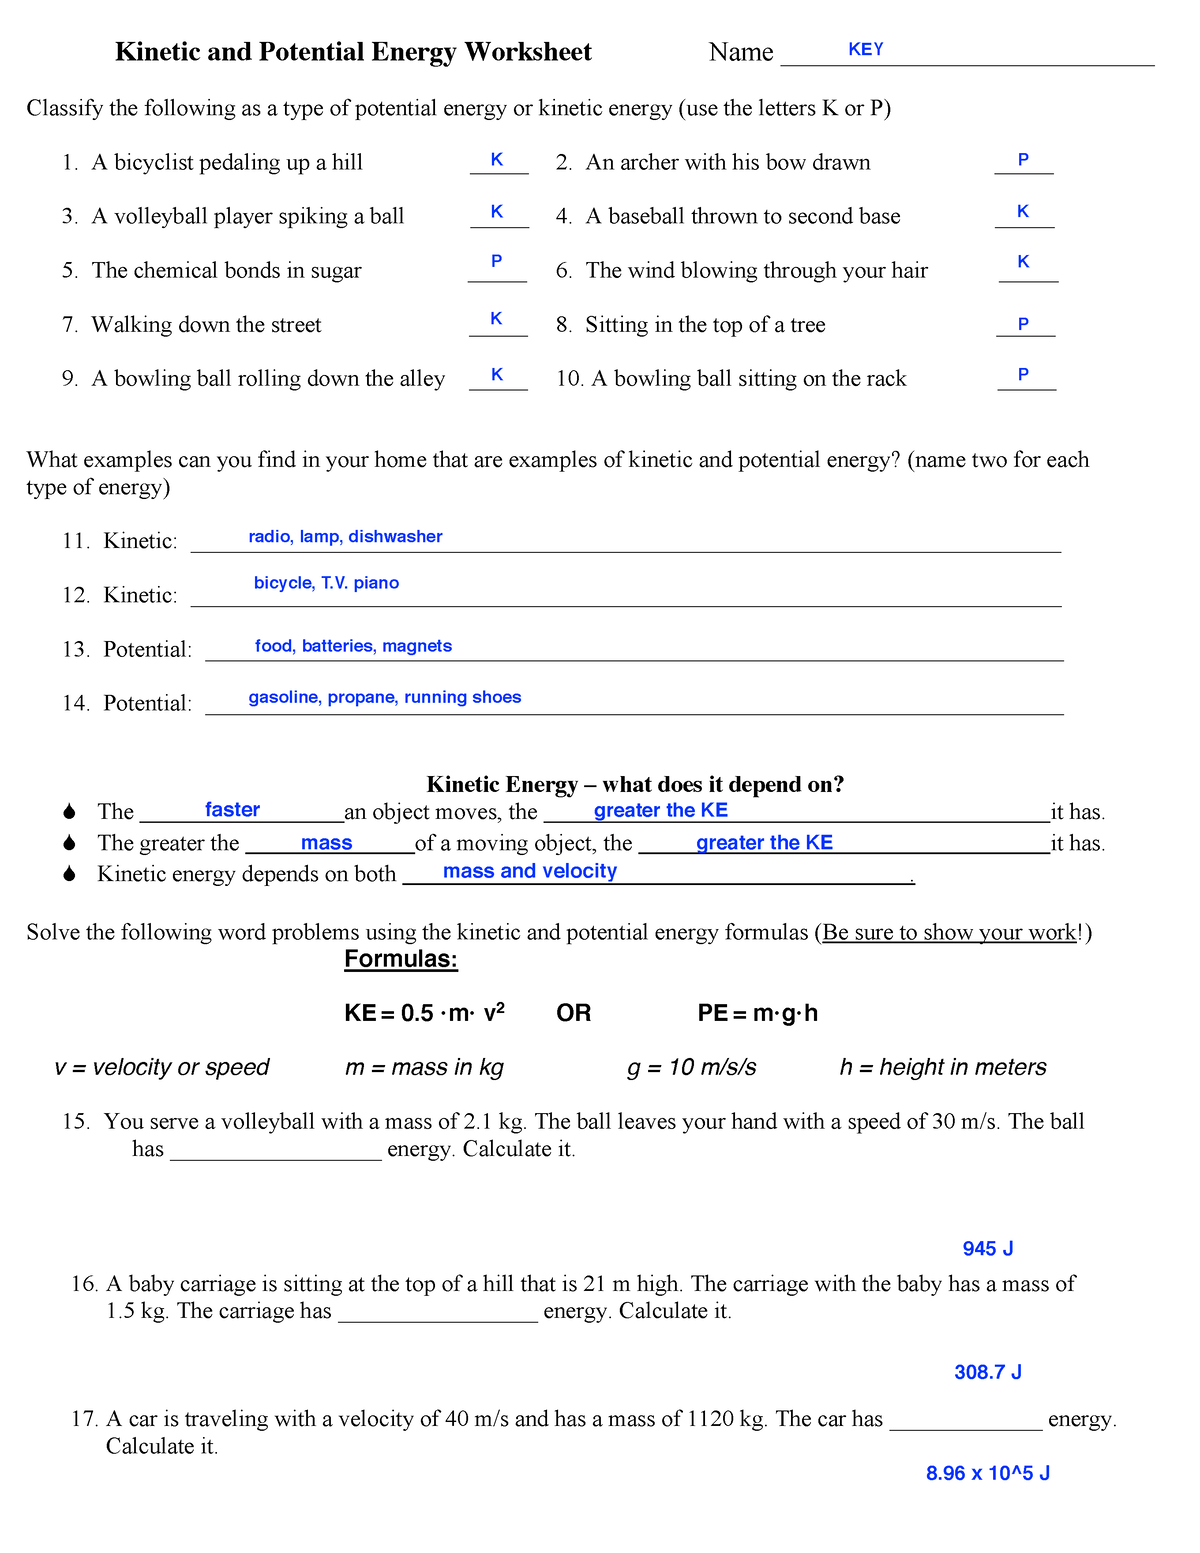 kinetic-and-potential-energy-worksheet-key-g-9-kinetic-and-potential